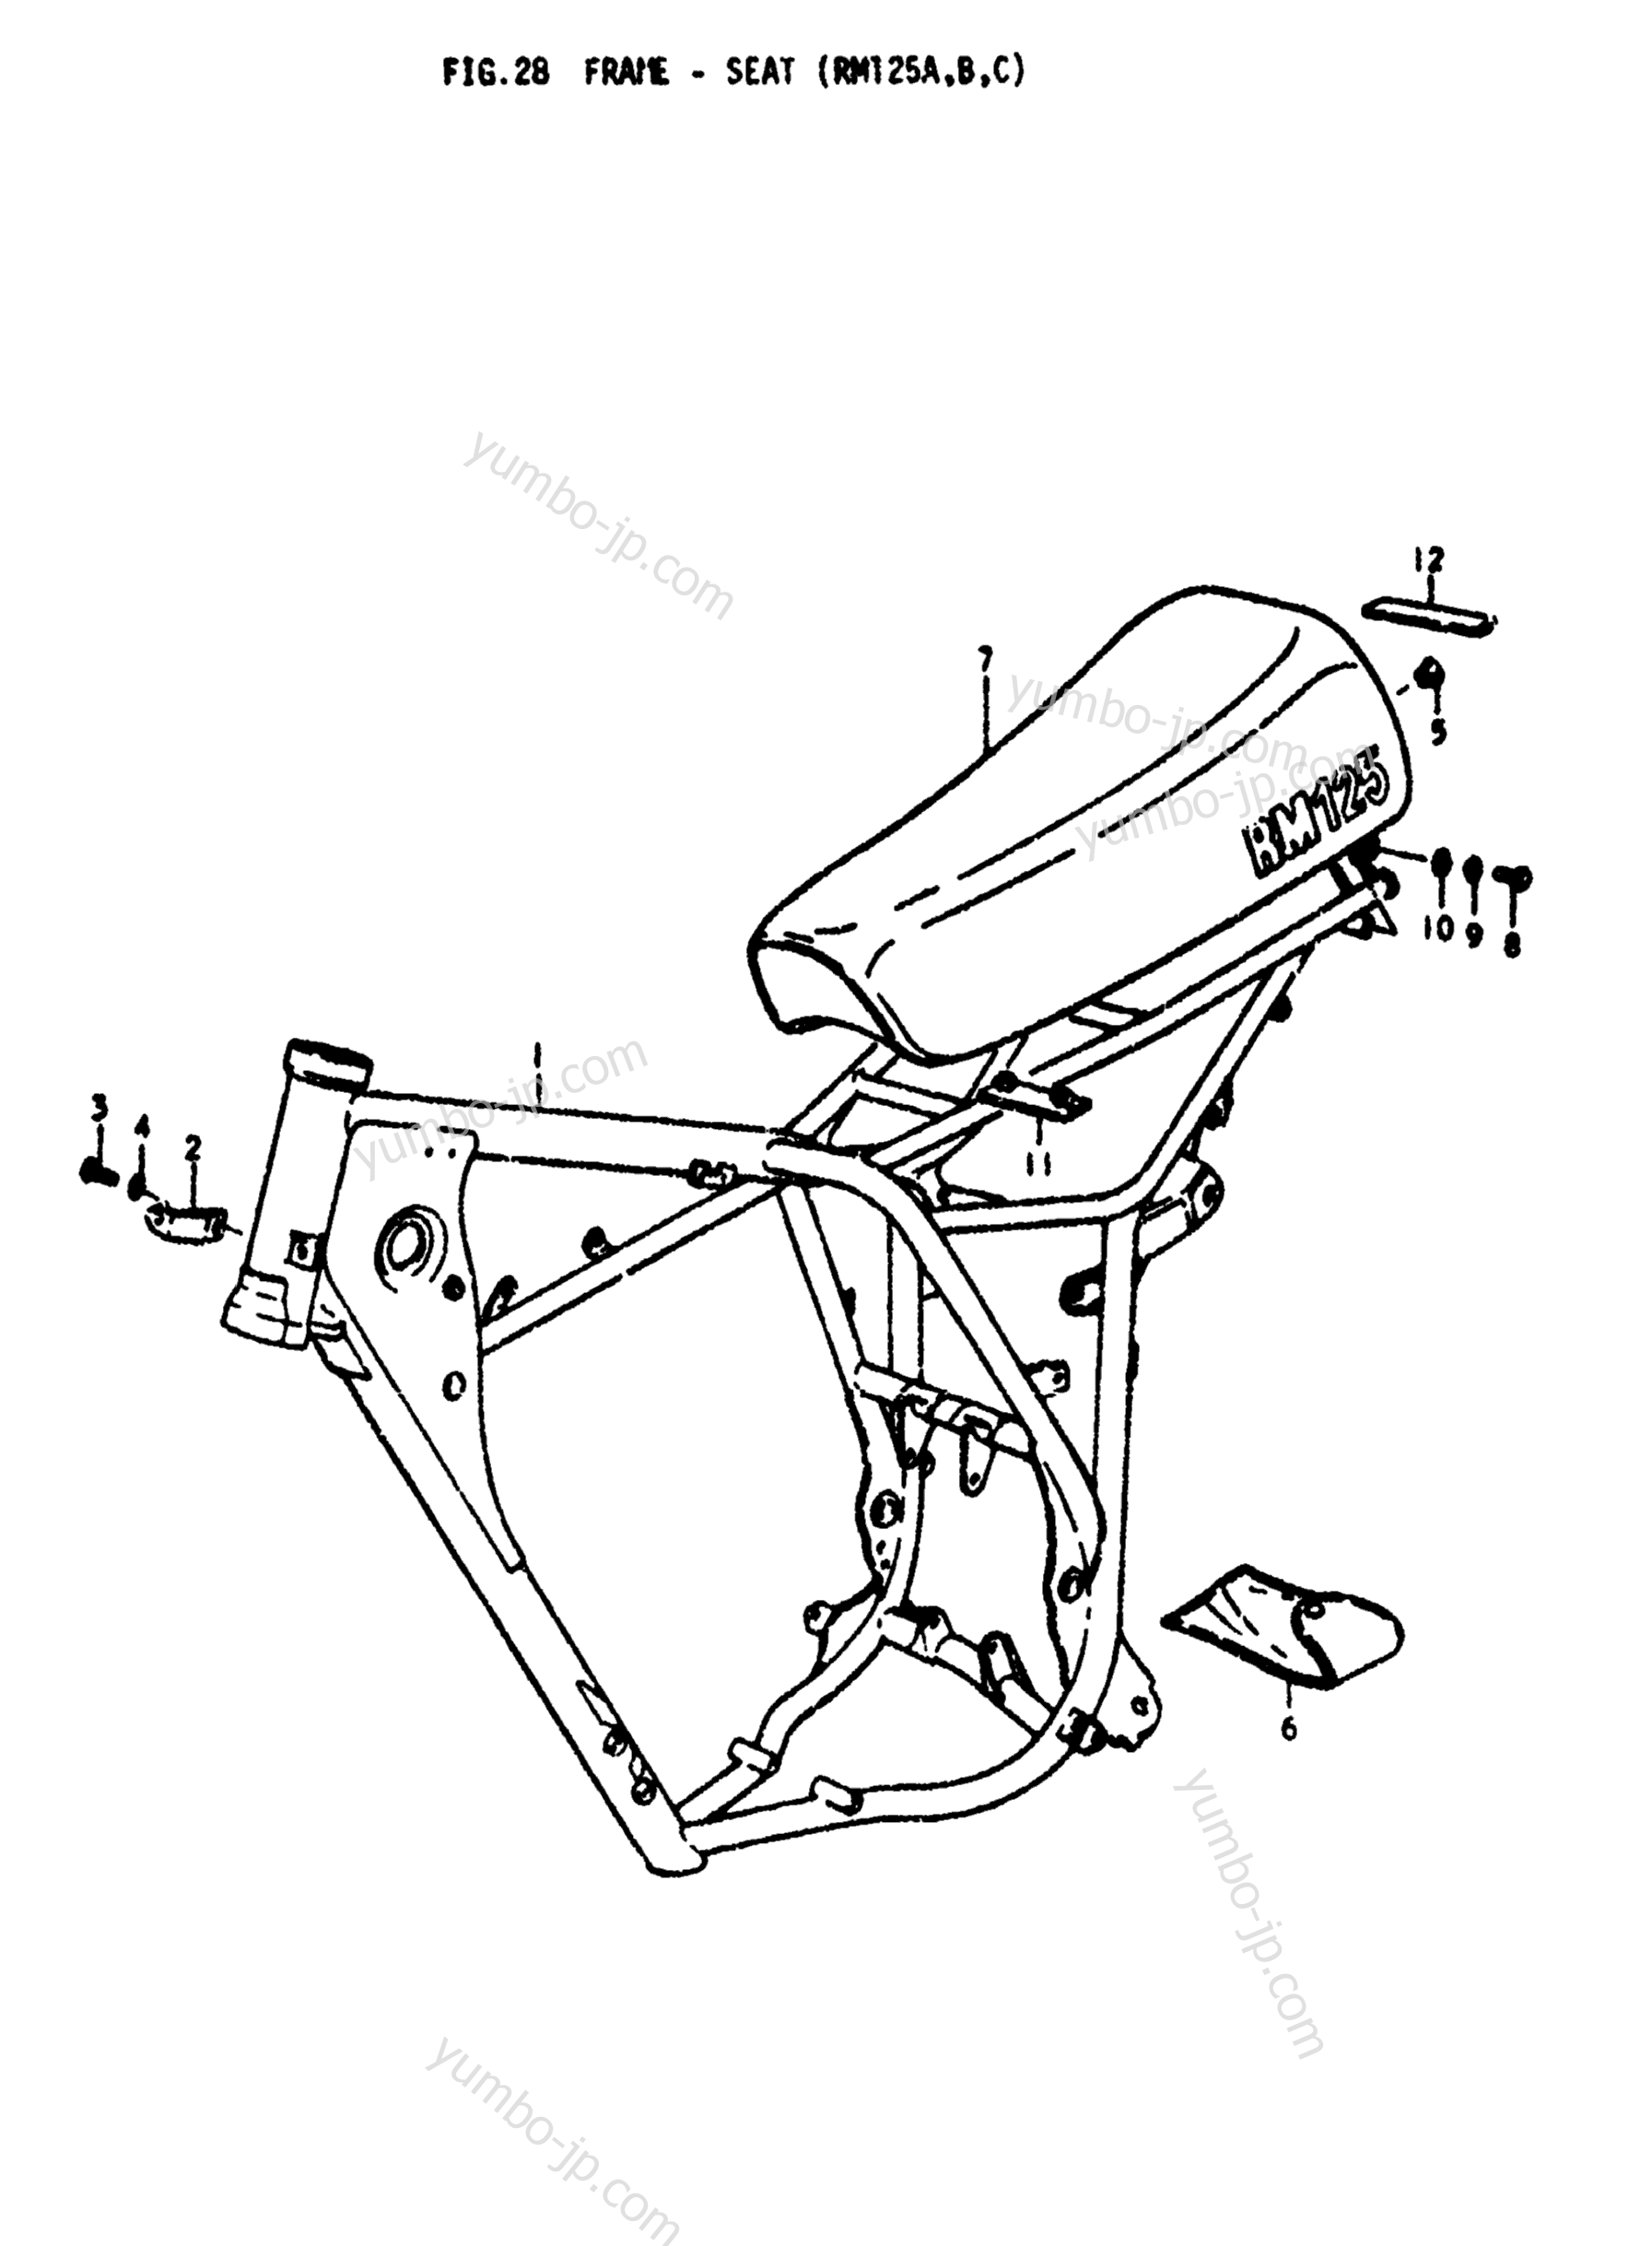 FRAME - SEAT (RM125A for motorcycles SUZUKI RM125 1975 year